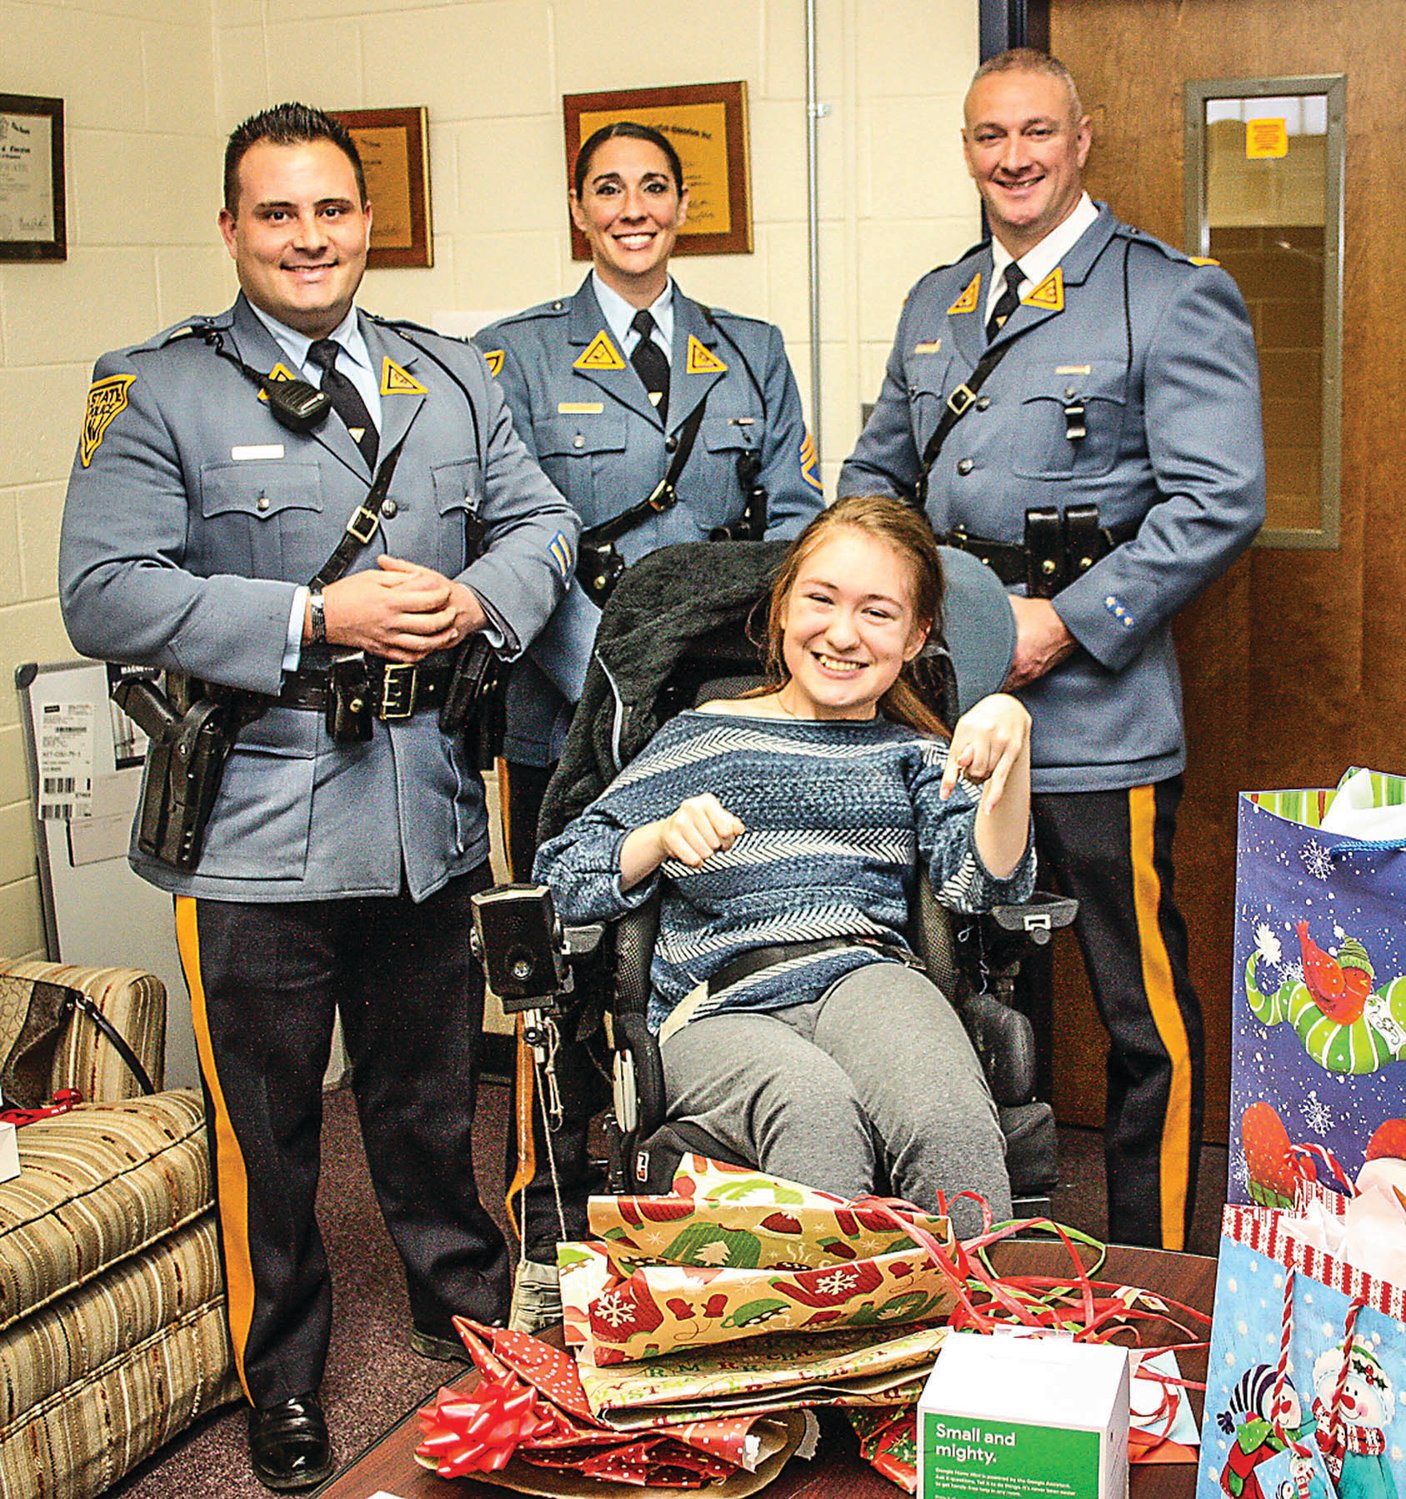 Faith Scott, a Del Val High School junior, was delighted by a shower of gifts presented to her by this delegation from the state police stationed in Kingwood, N.J. They are, from left, Trooper Joe Seidler, Sgt. Jaclyn Jirus and Lt. Sean O’Connor.